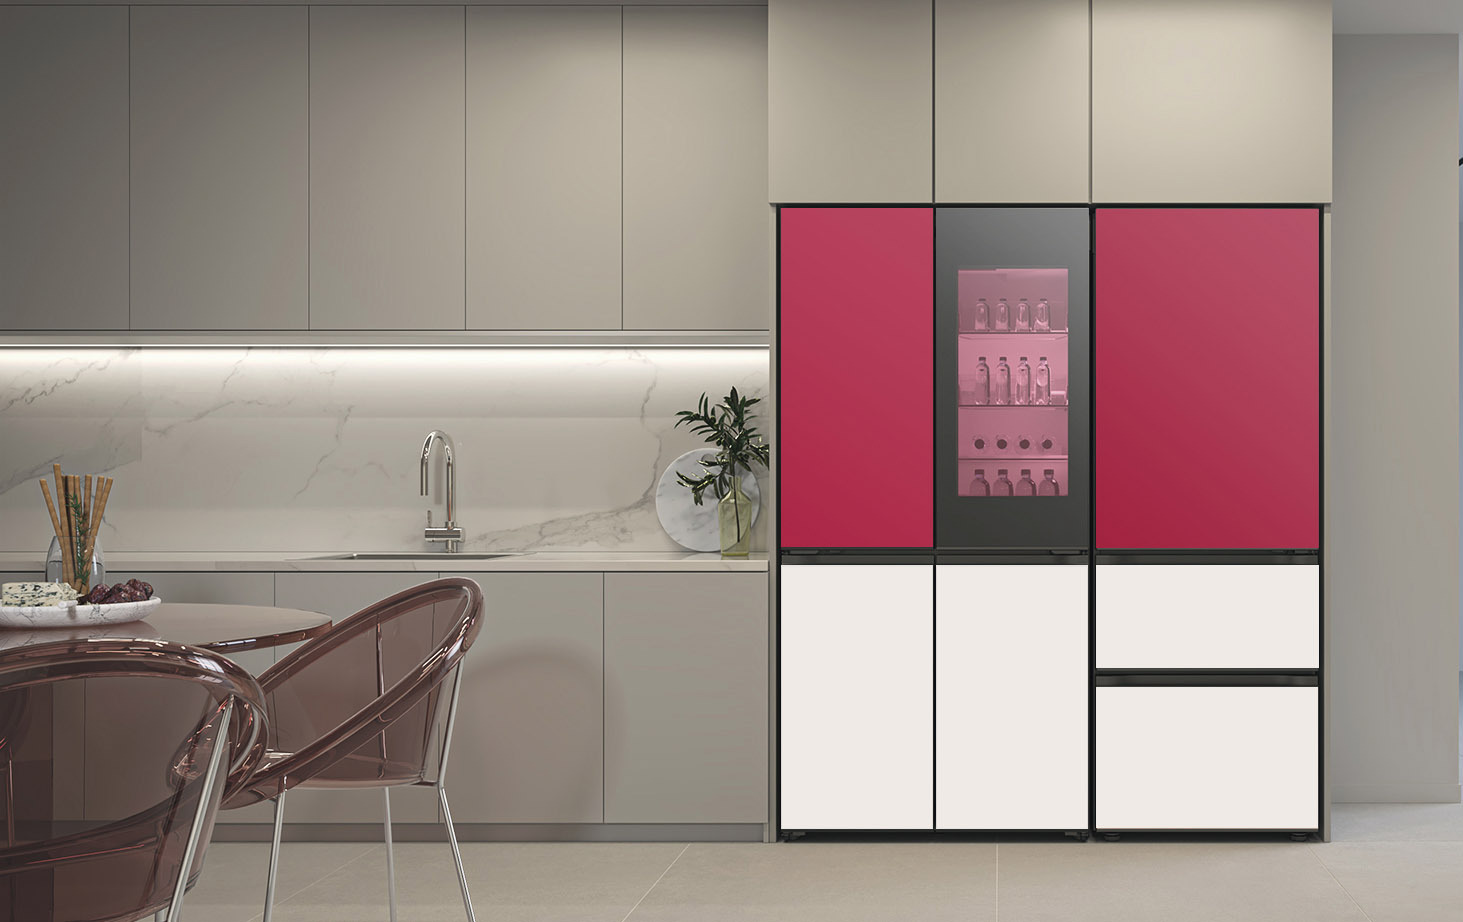 LG’s Refrigerator With MoodUP Brings Color and Customization to the Kitchen